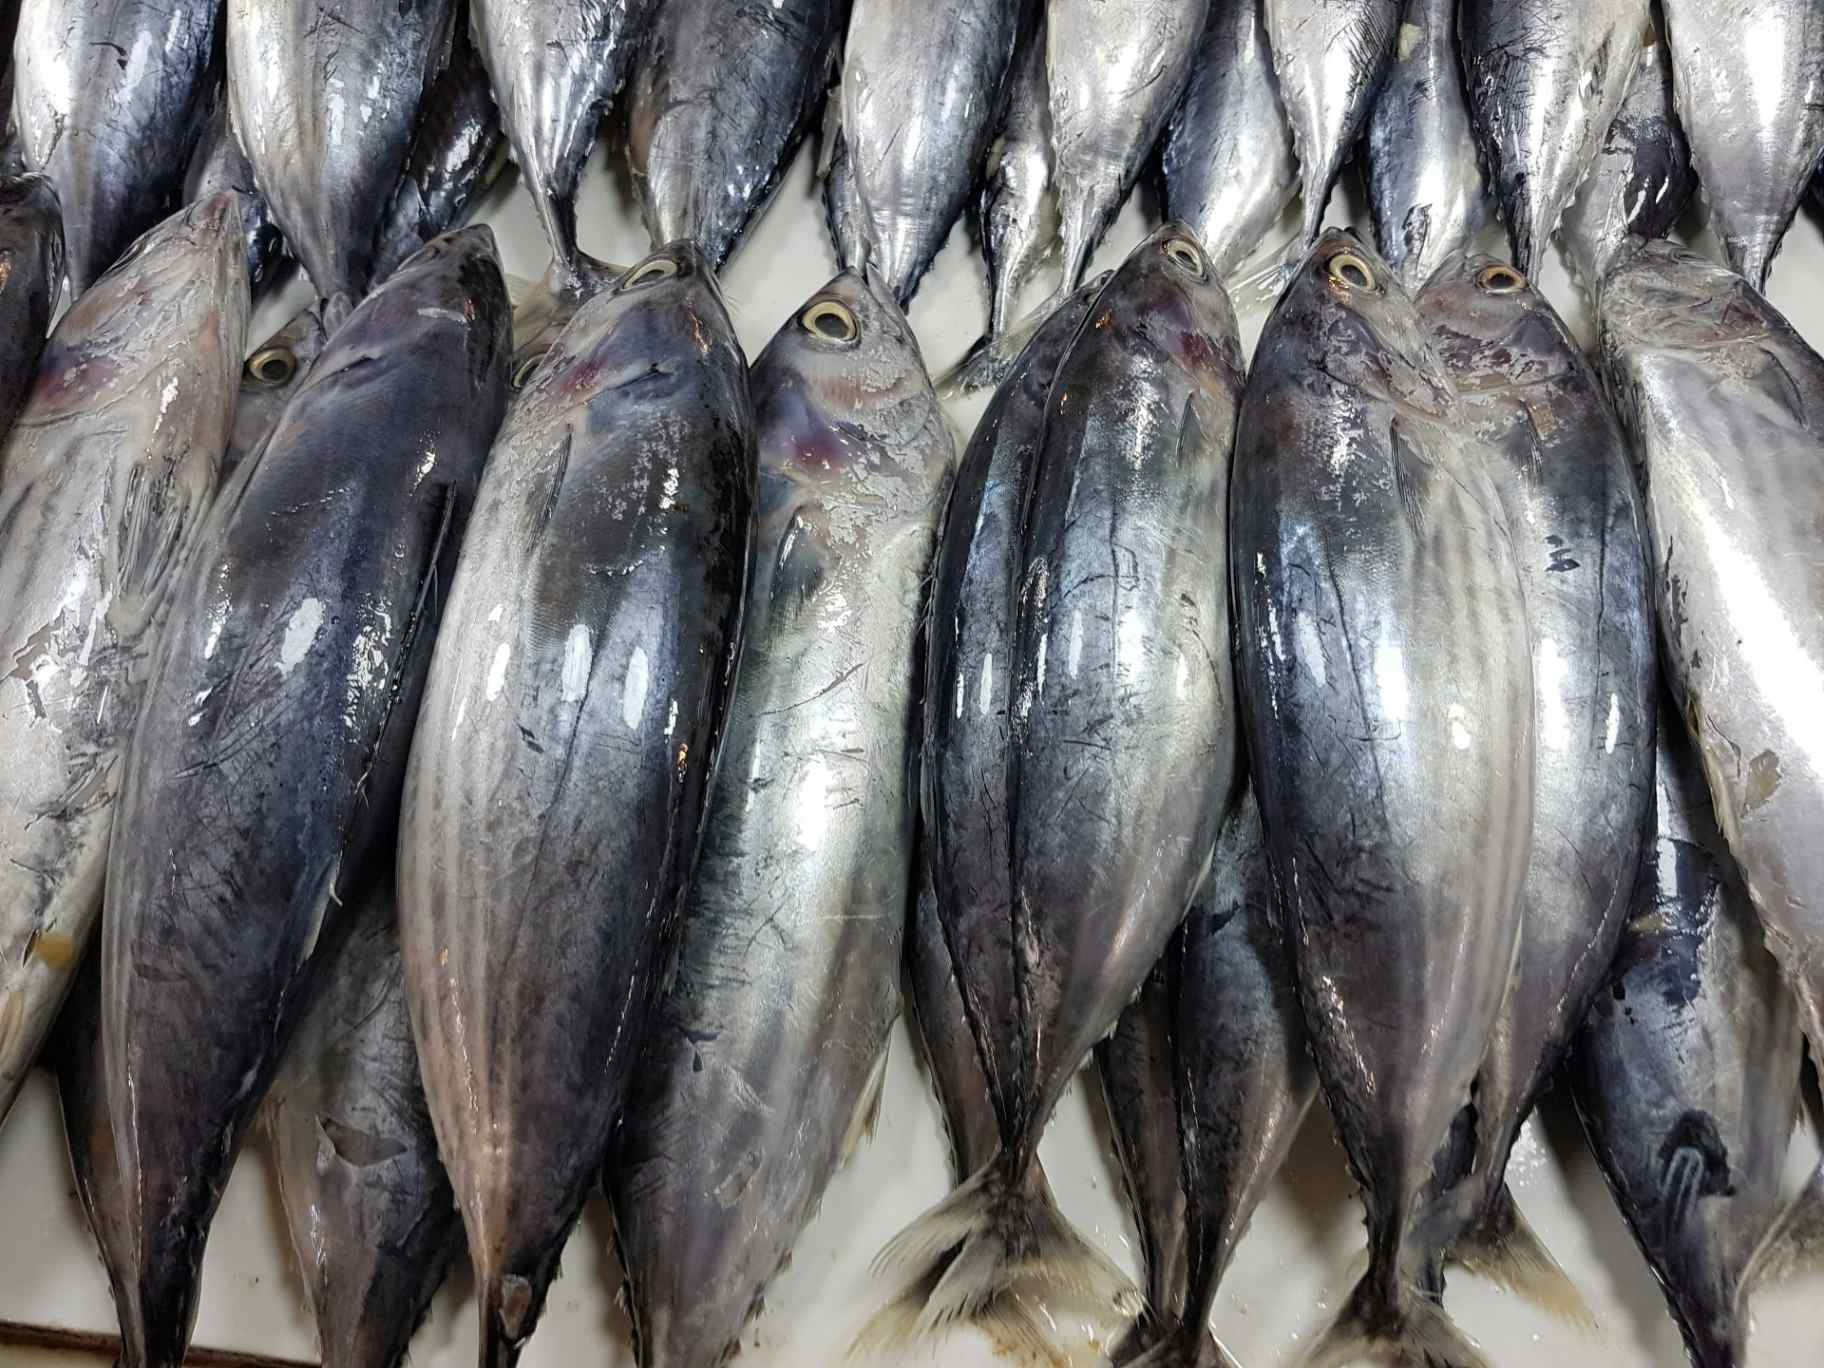 Fish prices: High prices to remain till November?